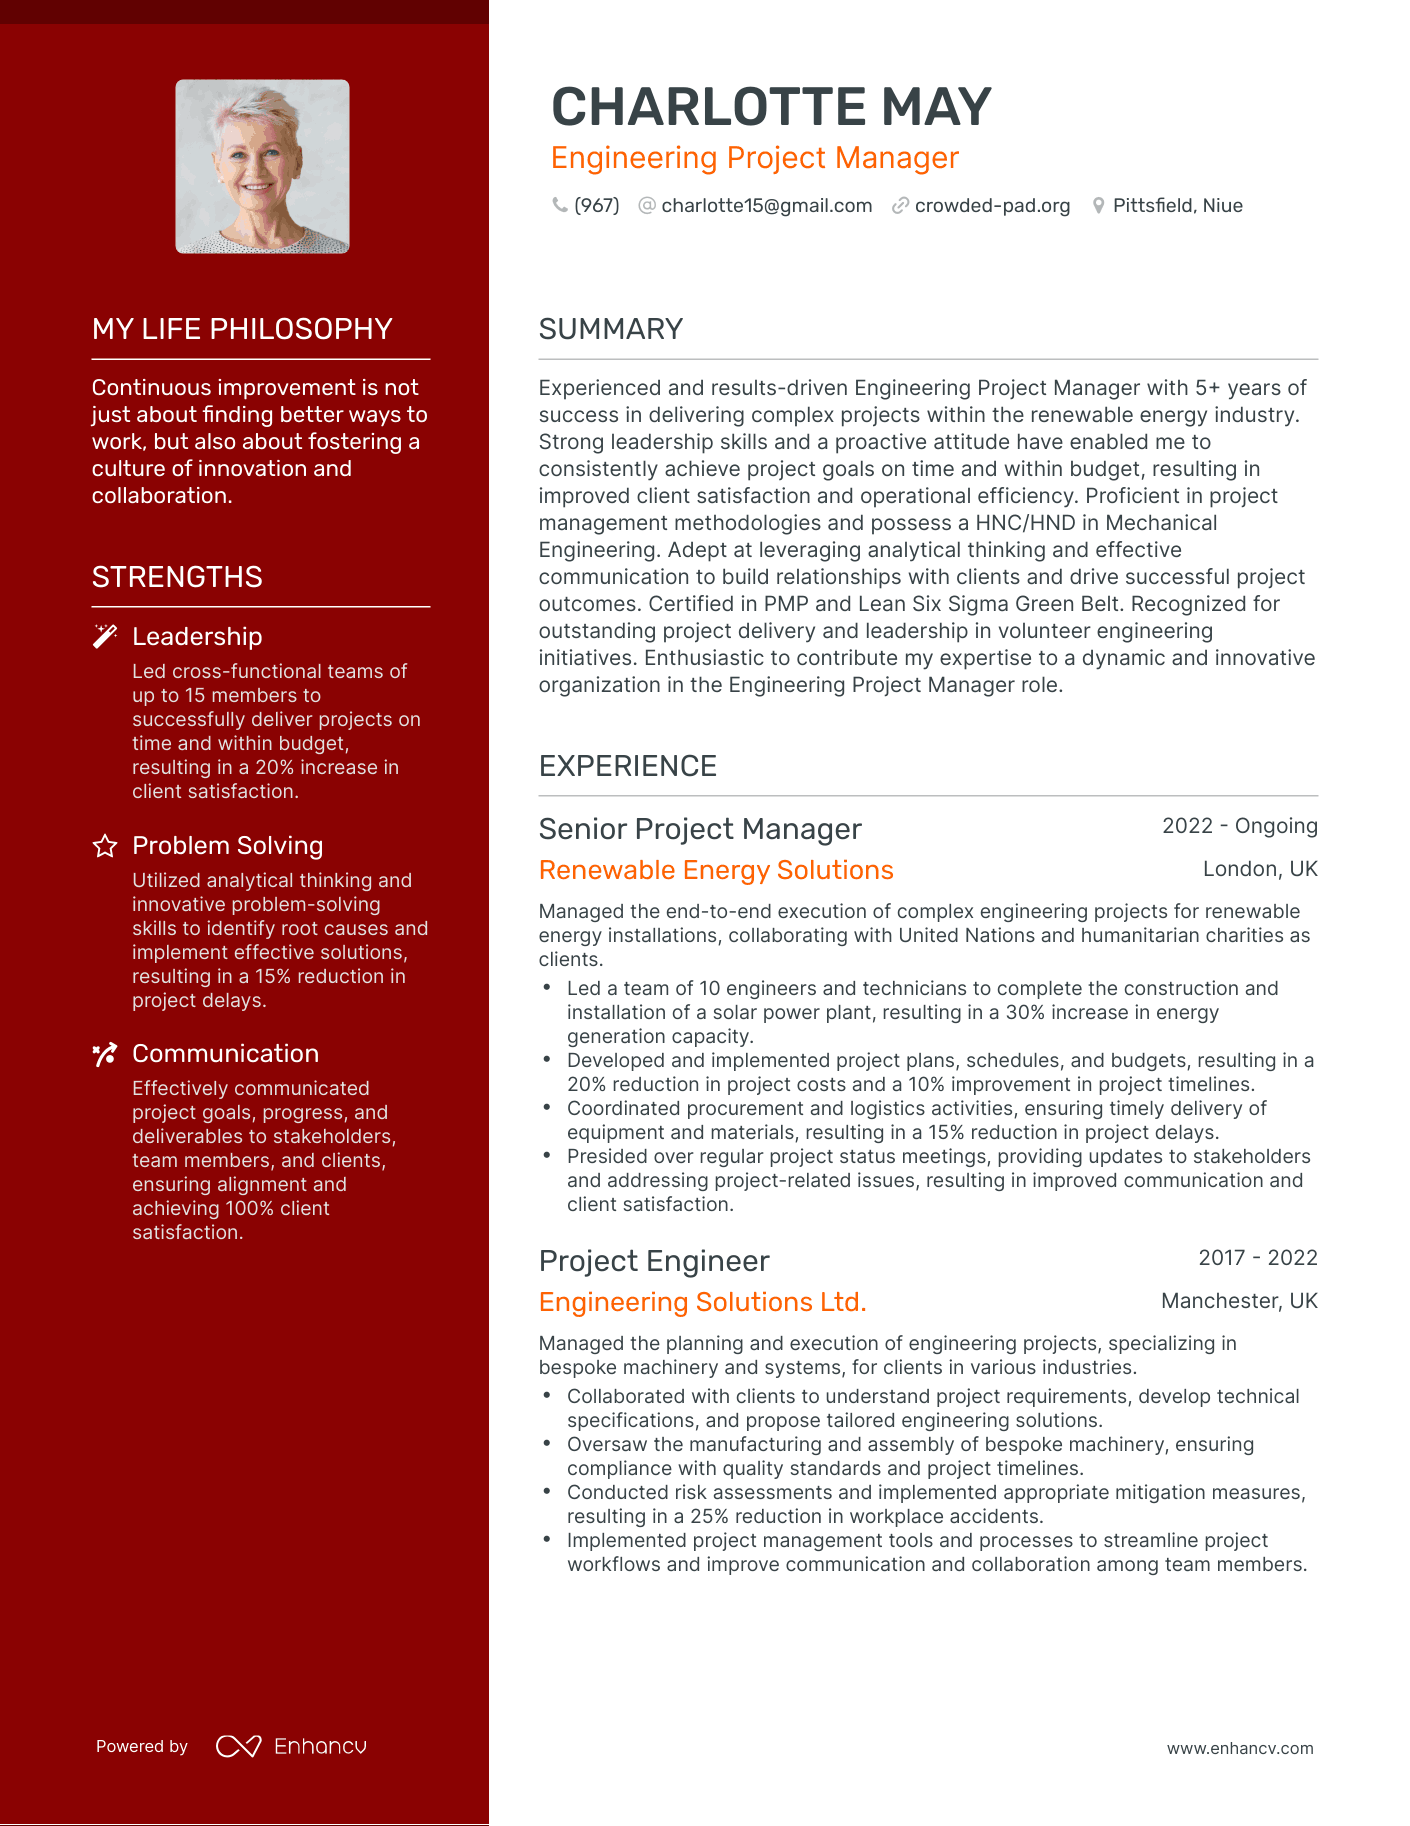 Engineering Project Manager resume example